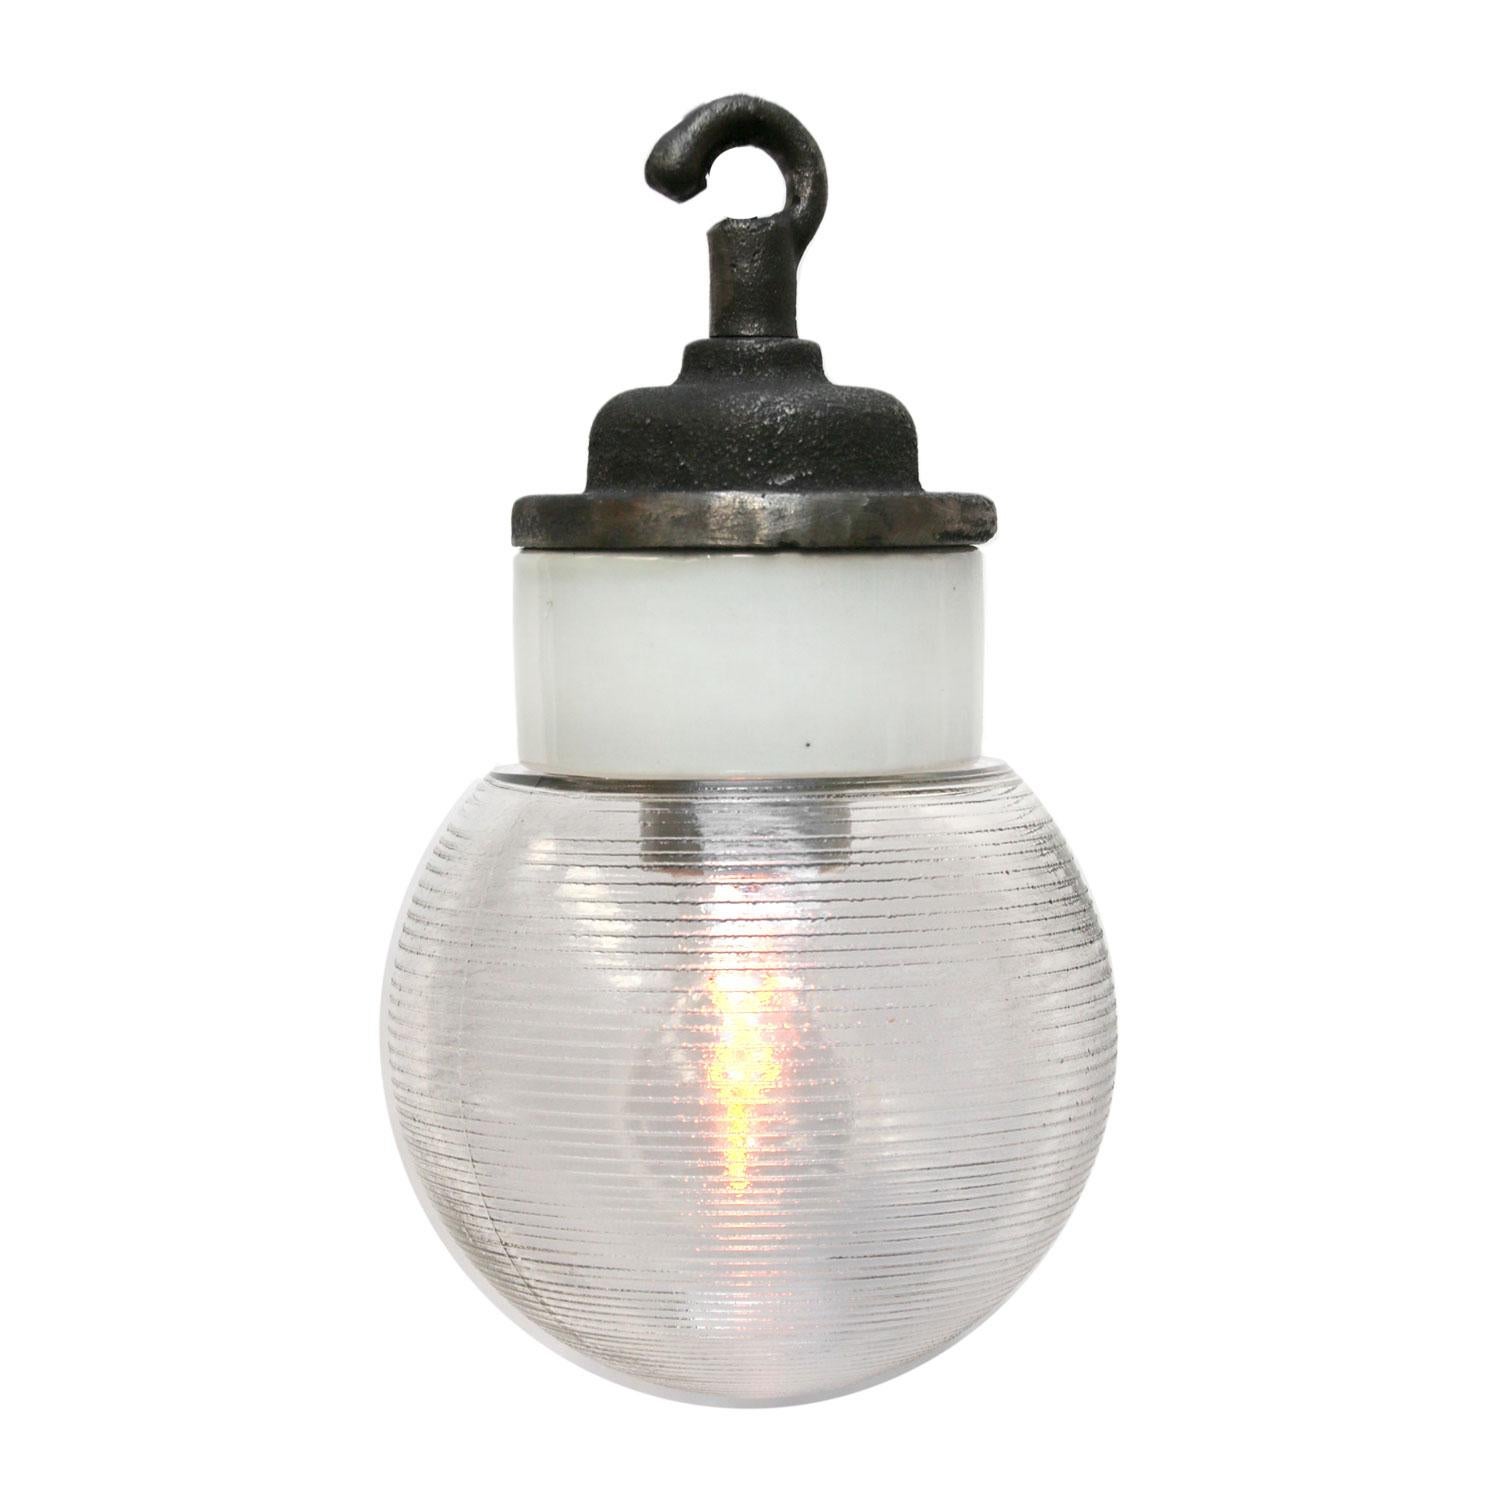 Porcelain Industrial hanging lamp.
White porcelain, cast iron and clear Holophane glass.
2 conductors, no ground.

Weight: 1.50 kg / 3.3 lb

Priced per individual item. All lamps have been made suitable by international standards for